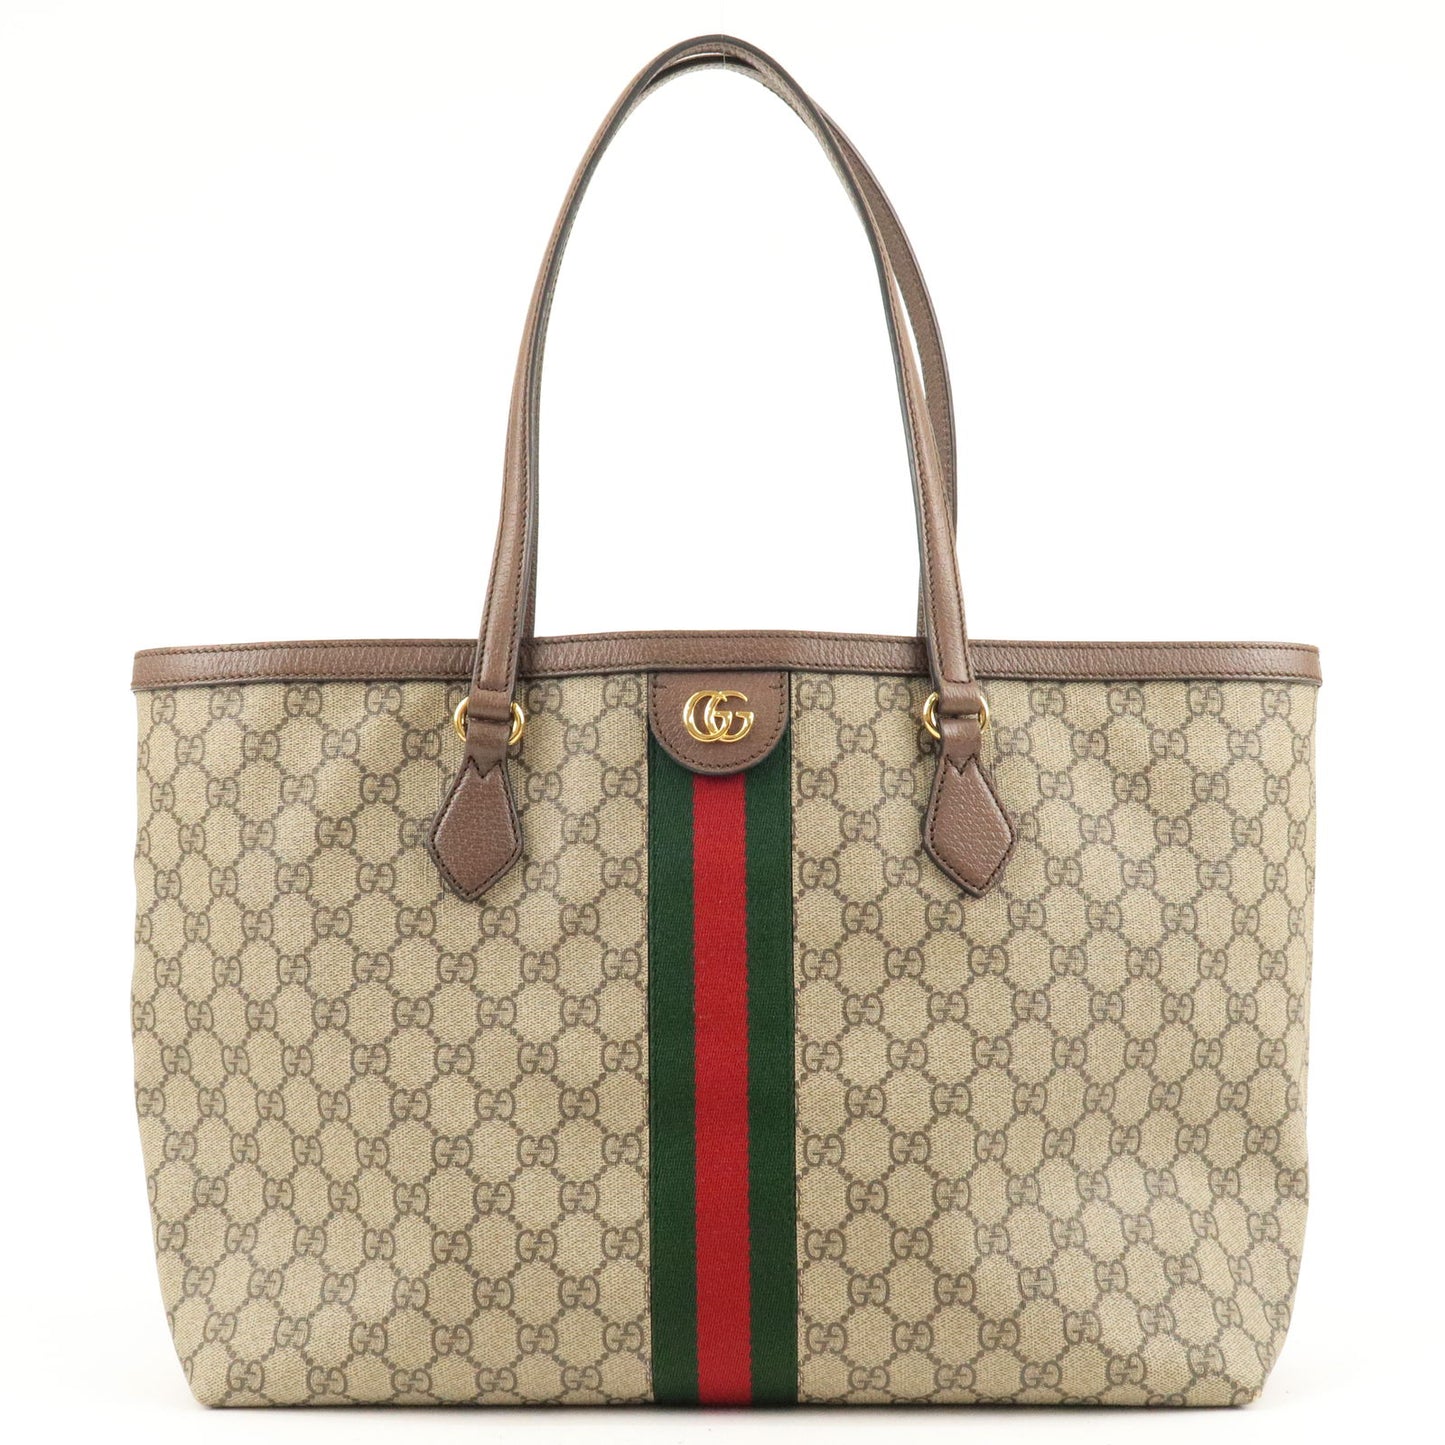 GUCCI-Ophidia-GG-Supreme-Leather-Tote-Bag-Beige-Brown-631685